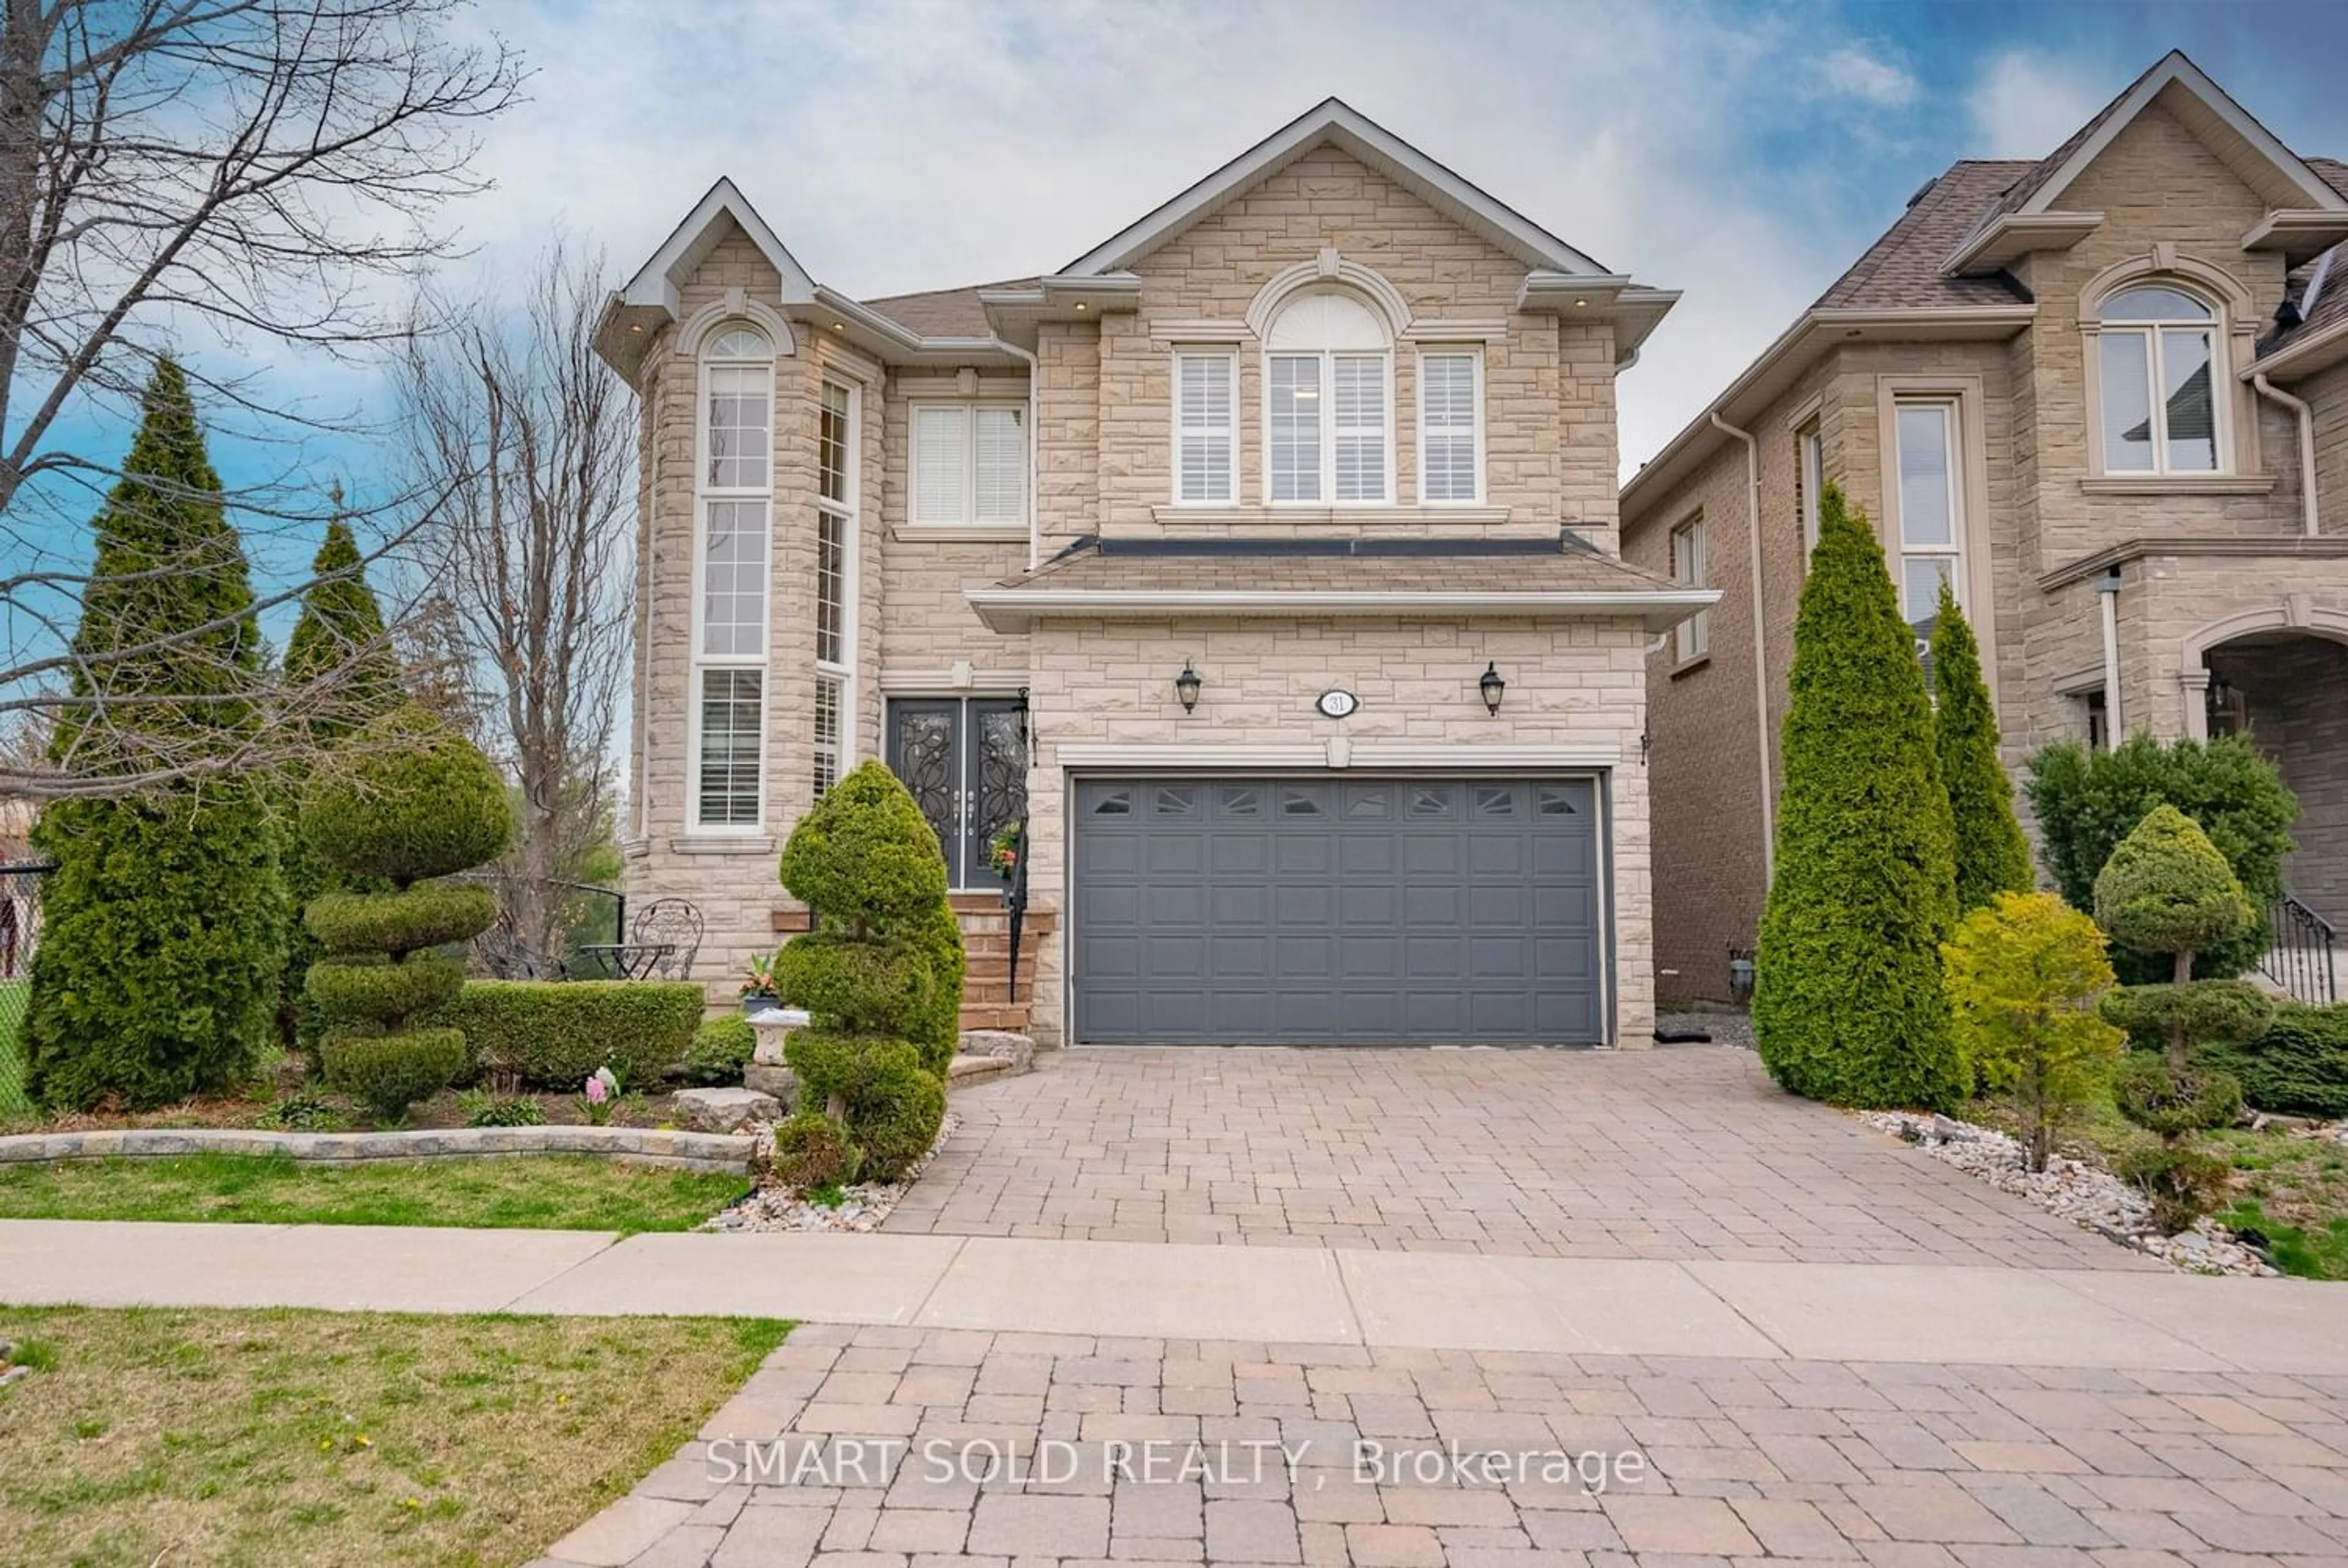 Home with brick exterior material for 31 Ridgestone Dr, Richmond Hill Ontario L4S 0A4